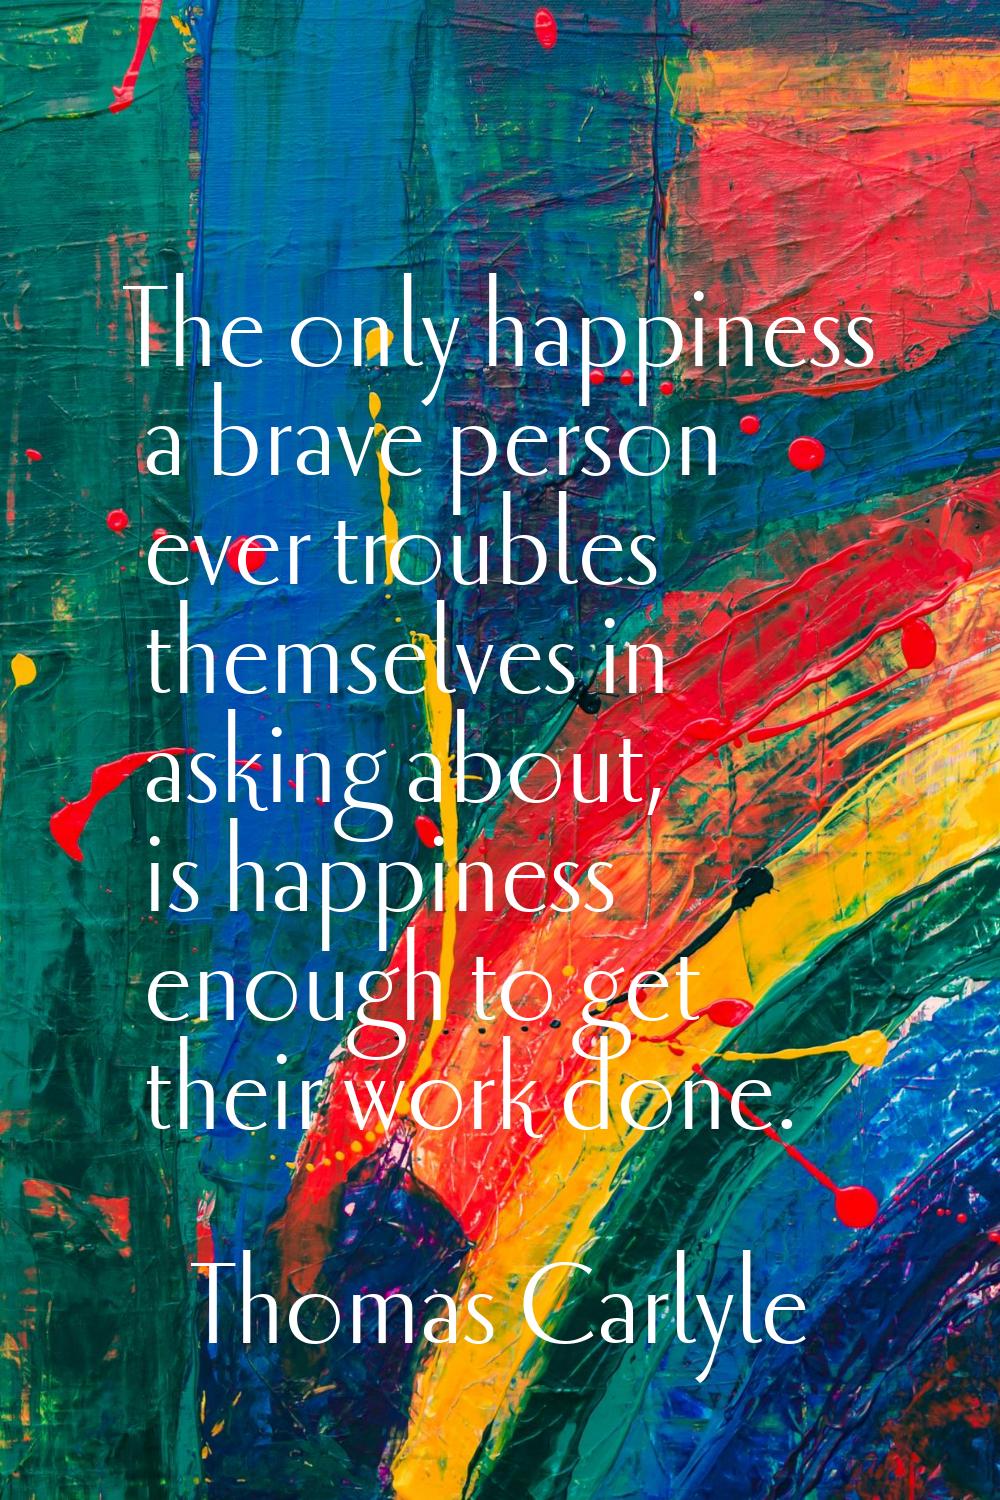 The only happiness a brave person ever troubles themselves in asking about, is happiness enough to 